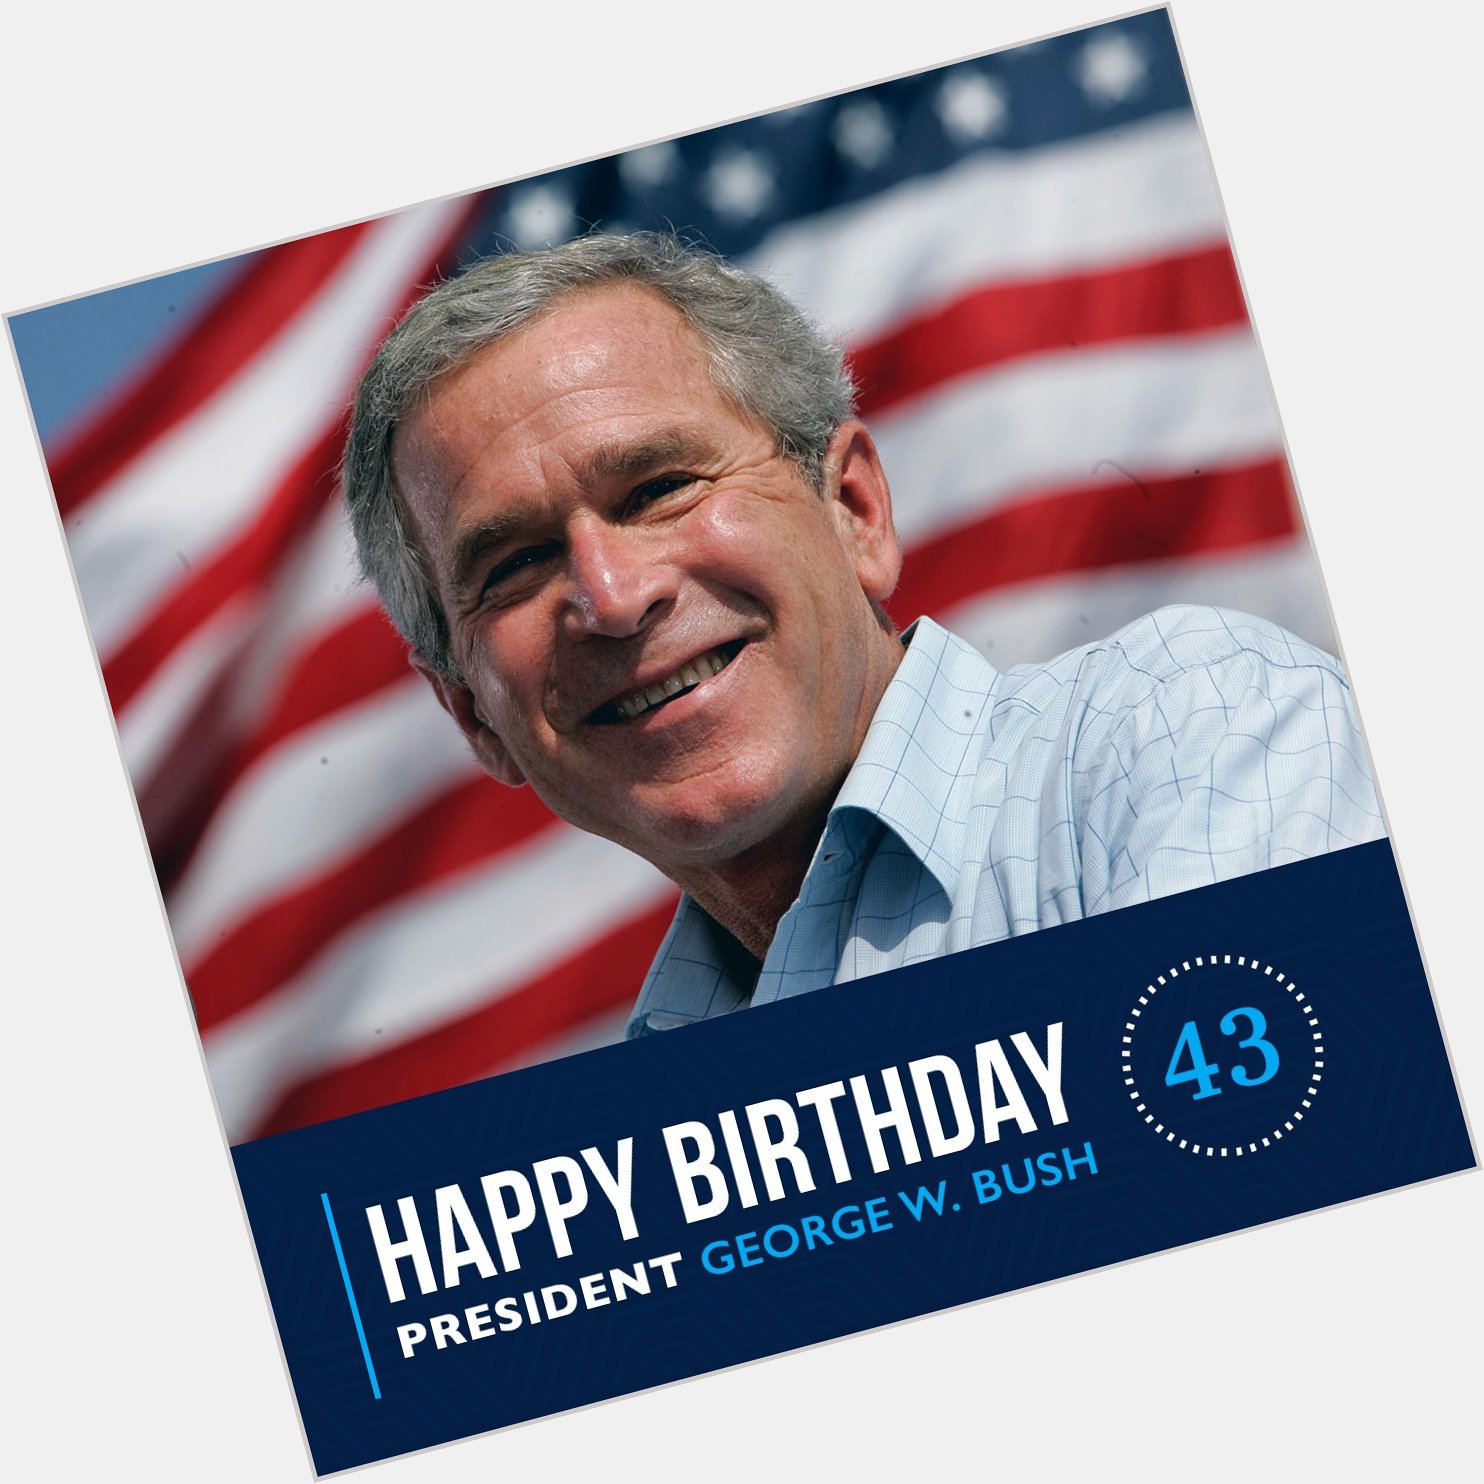 Join us in wishing a happy birthday to President George W. Bush! 